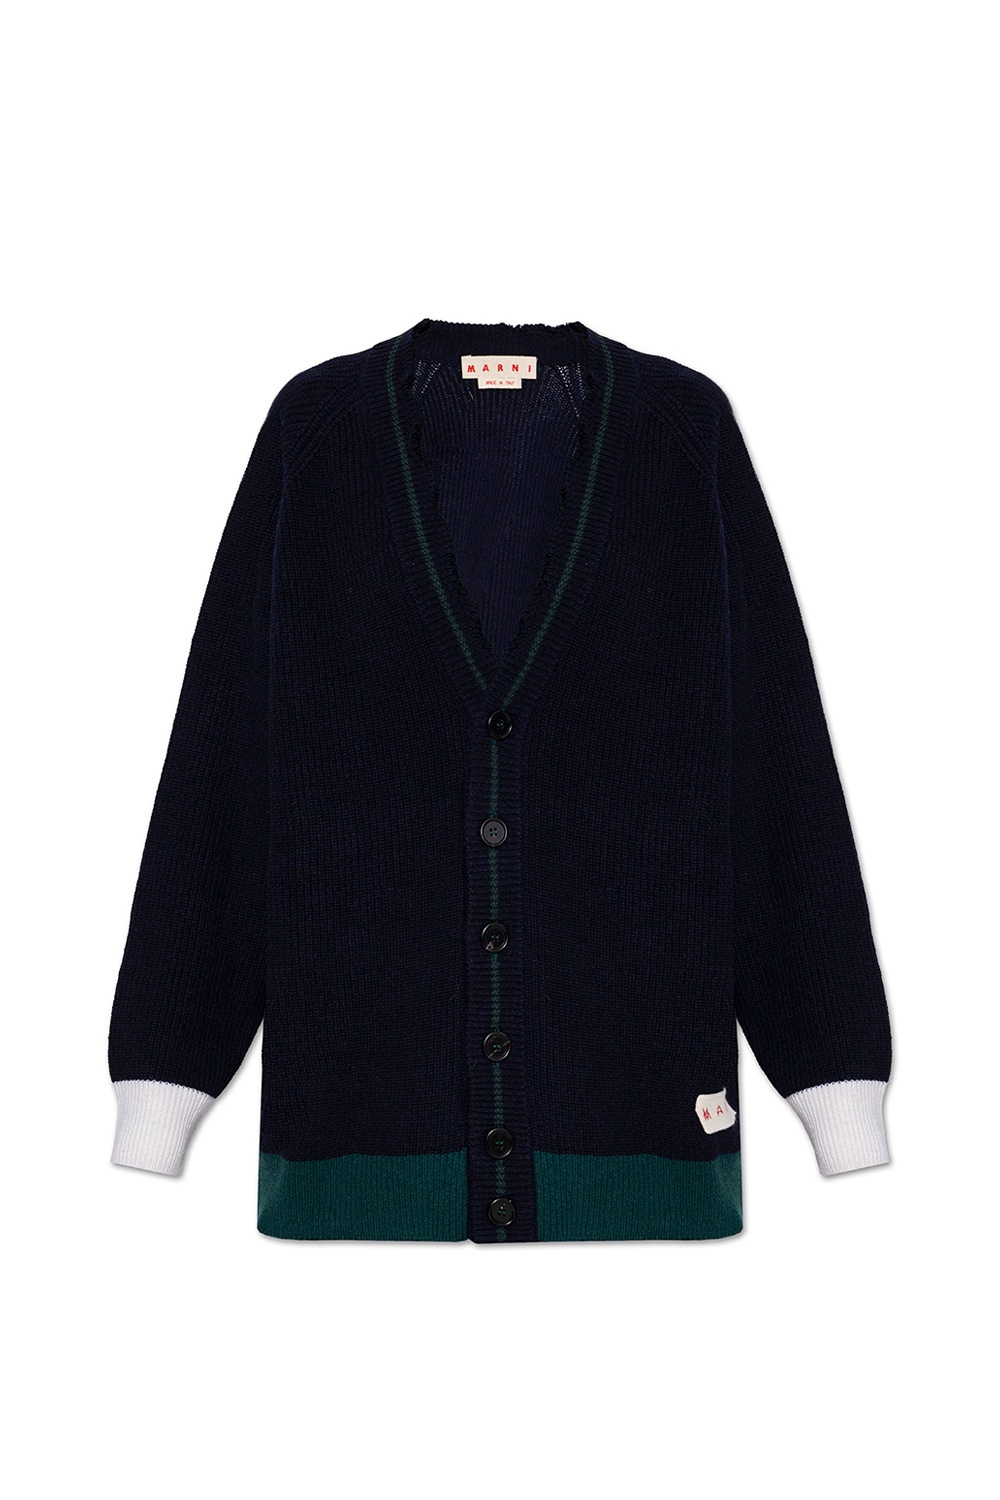 Marni Cardigan with vintage-effect